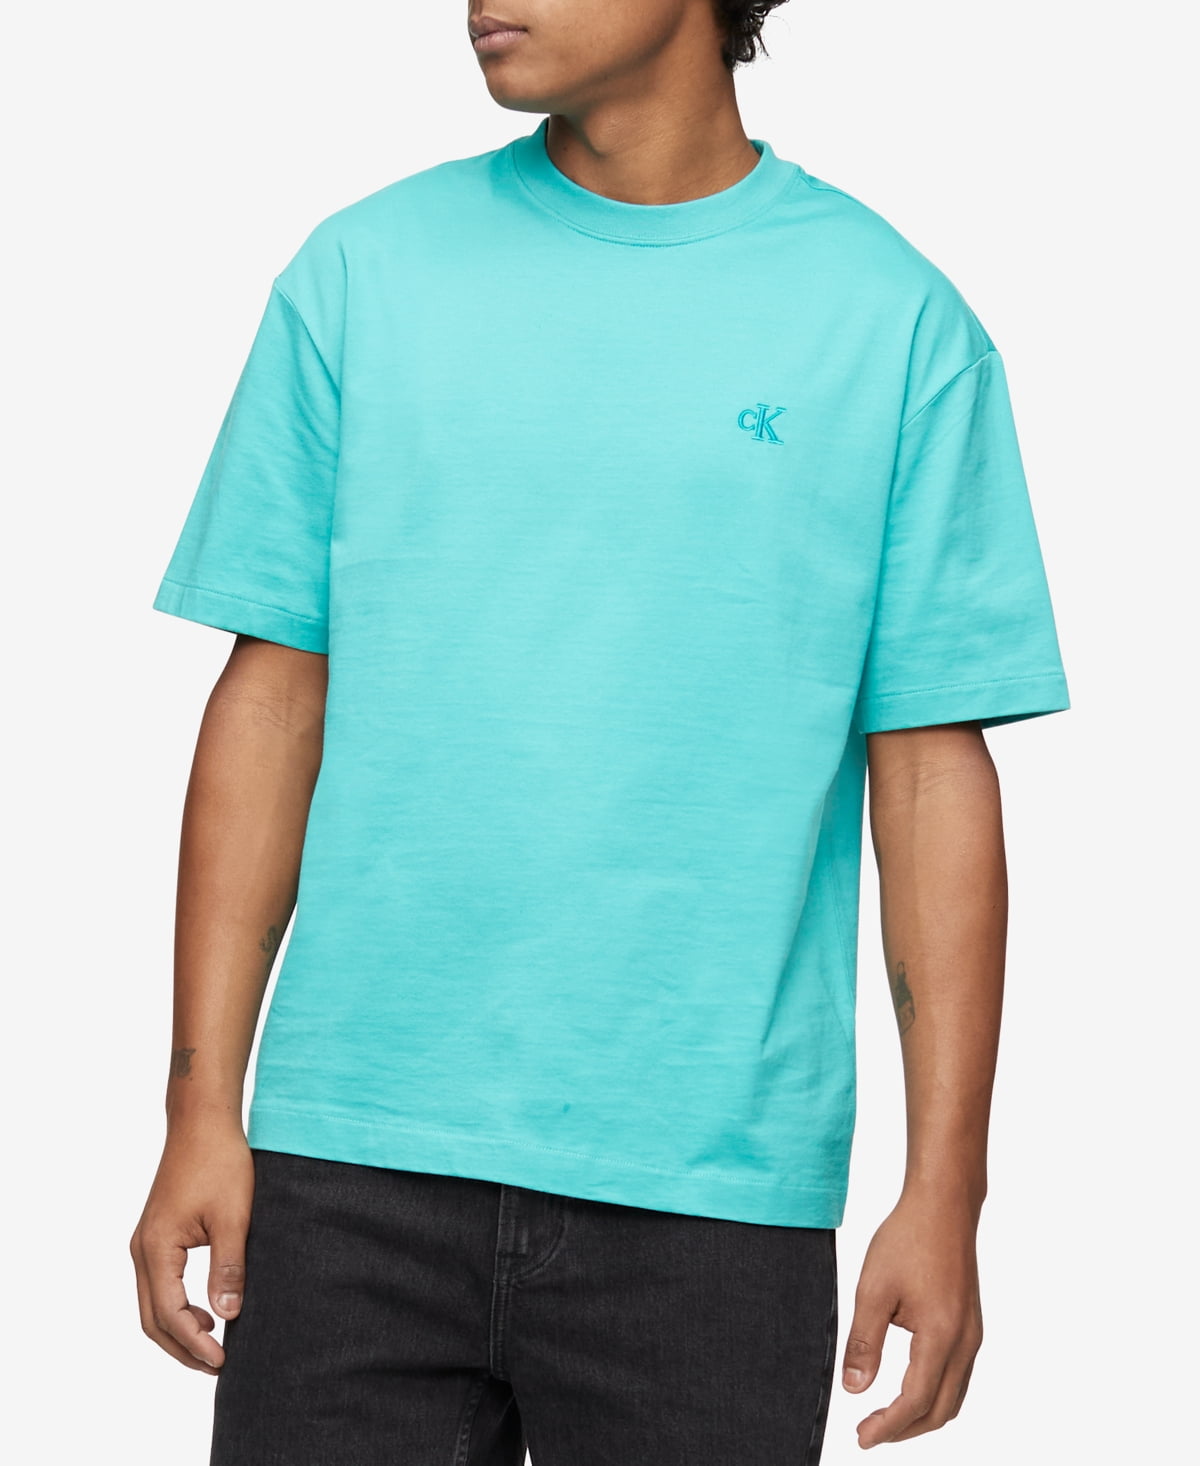 Calvin Klein Men\'s Relaxed Fit Archive Logo Crewneck T-Shirt, Turquoise,  Small